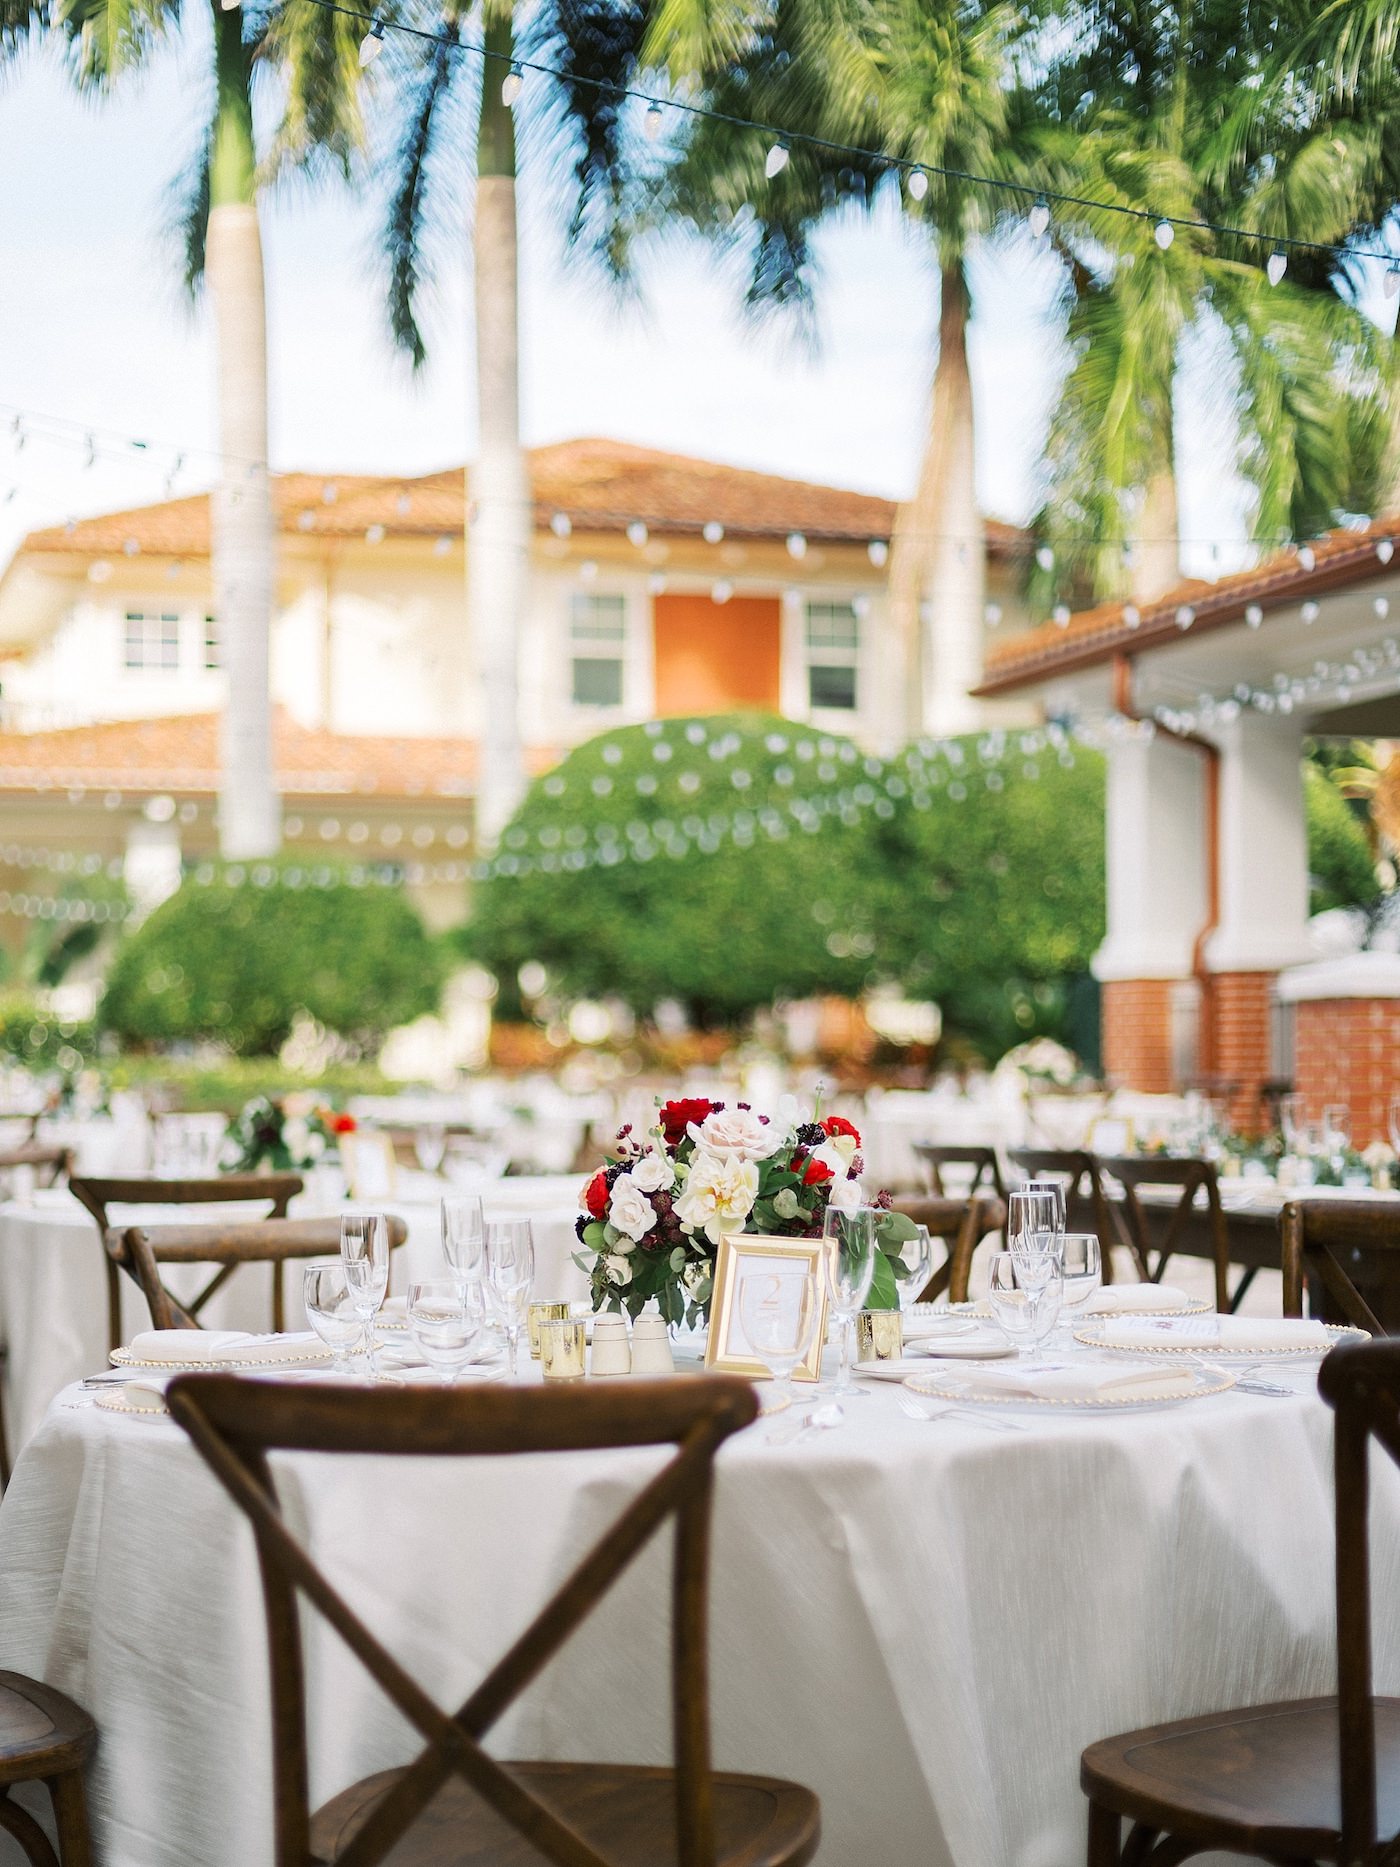 Florida Outdoor Wedding Reception with Canopy String Lights and Wood Cross Back French Country Chairs | Ivory Table Linens and Gold Frame Table Numbers with Low Floral Centerpiece of Red and White Roses and Greenery